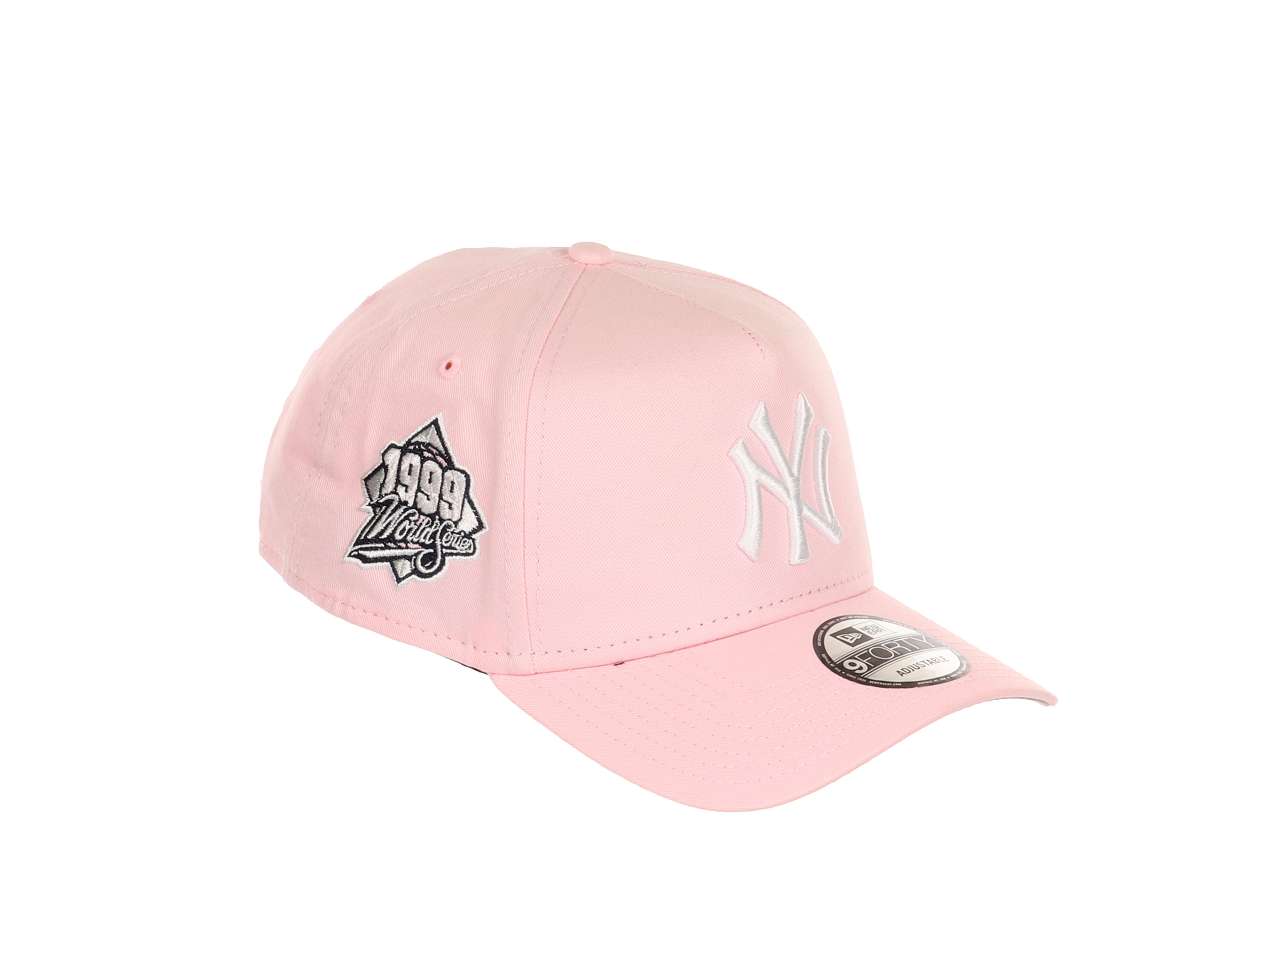 New York Yankees  MLB  World Series  1999 Sidepatch Cooperstown Pink 9Forty A-Frame Snapback Cap New Era